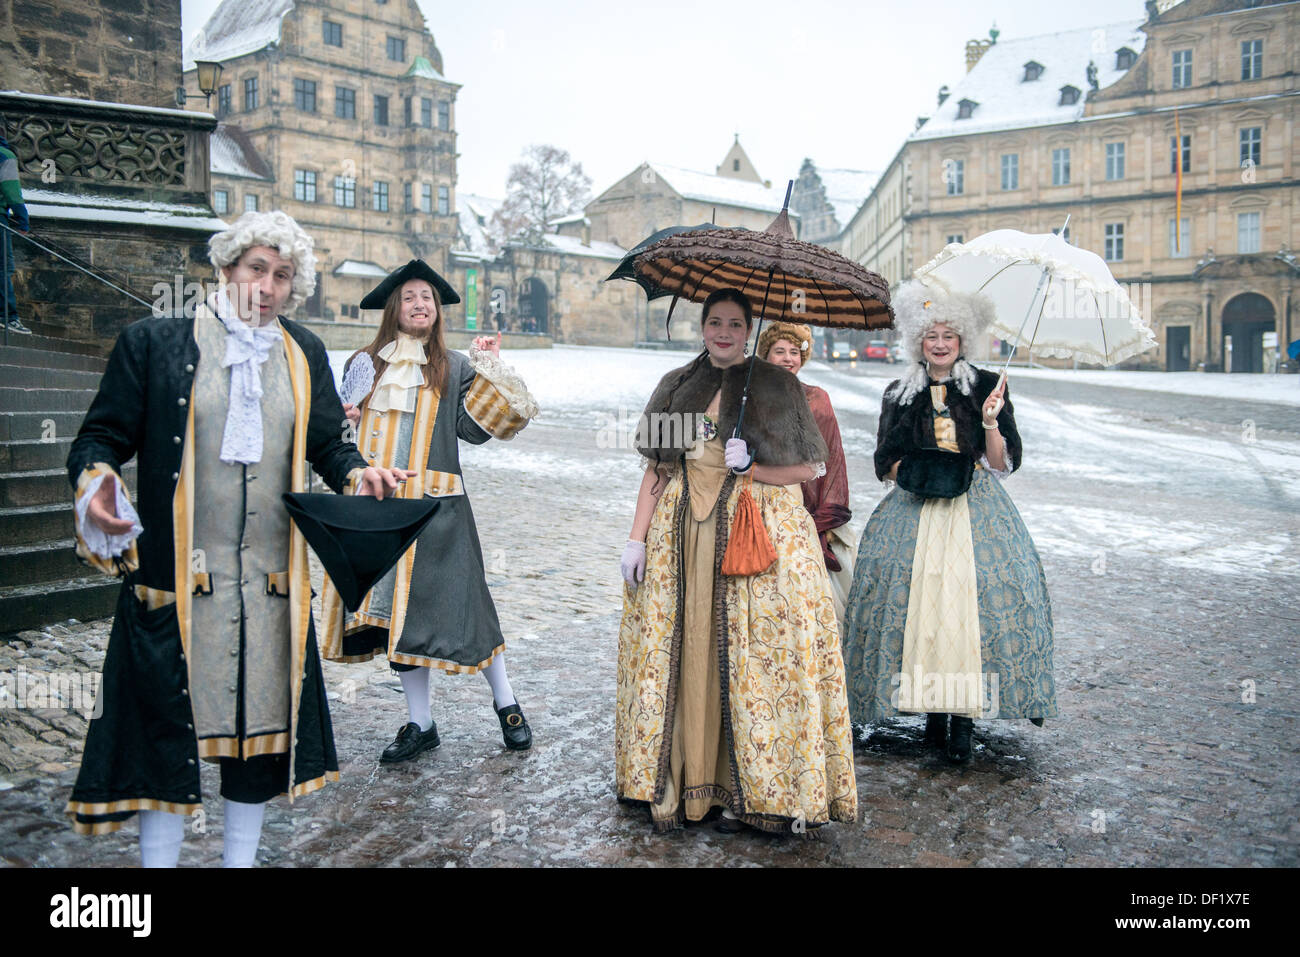 Reenactors in 18th century costumes, New Residence courtyard, Bamberg, Germany Stock Photo